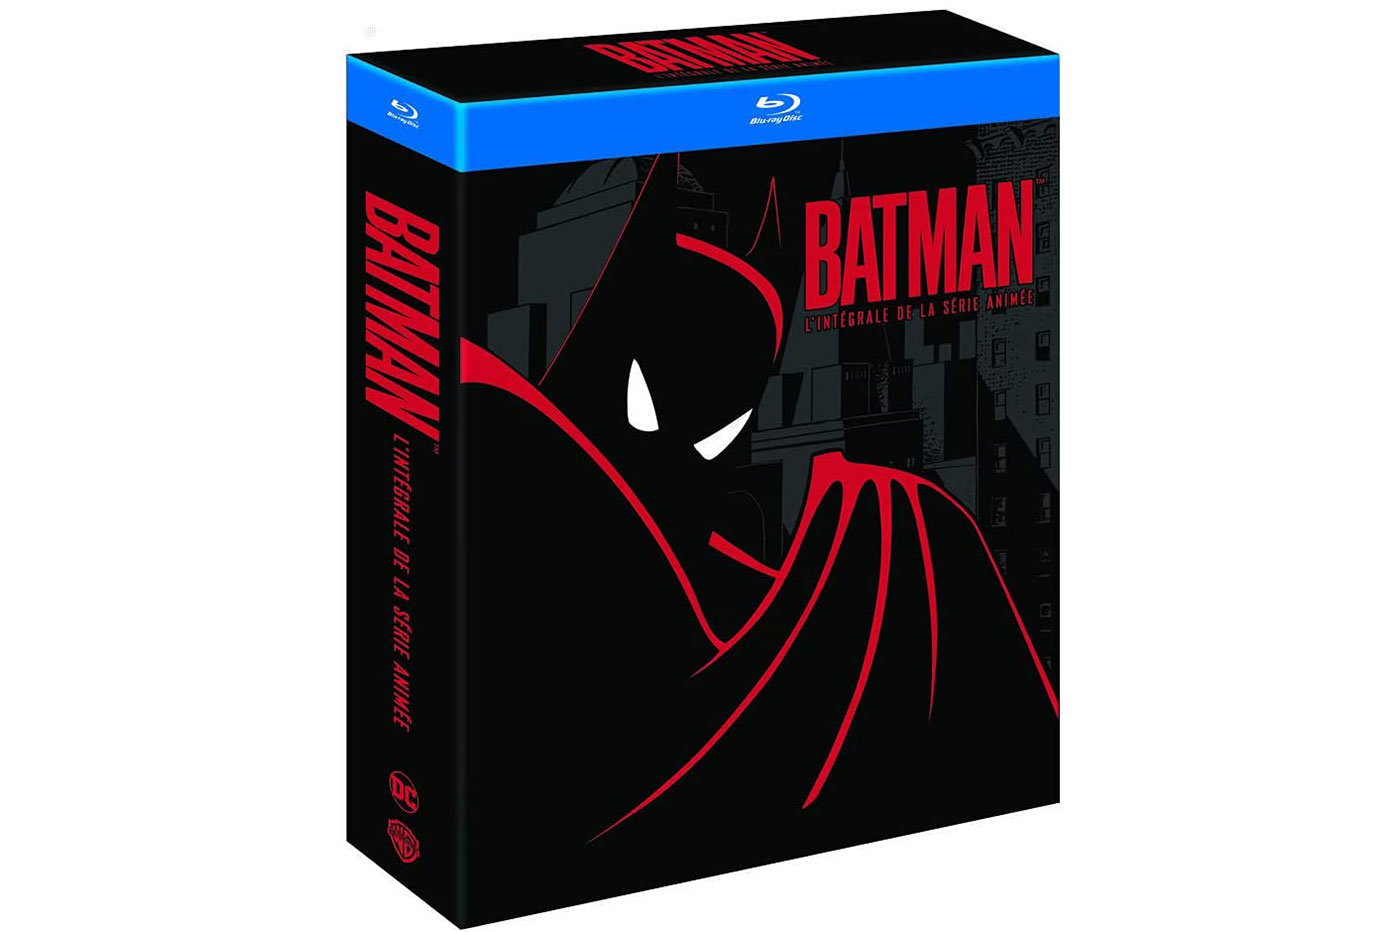 The Blu-Ray box set of the excellent Batman animated series, is over 60%  off at Amazon!